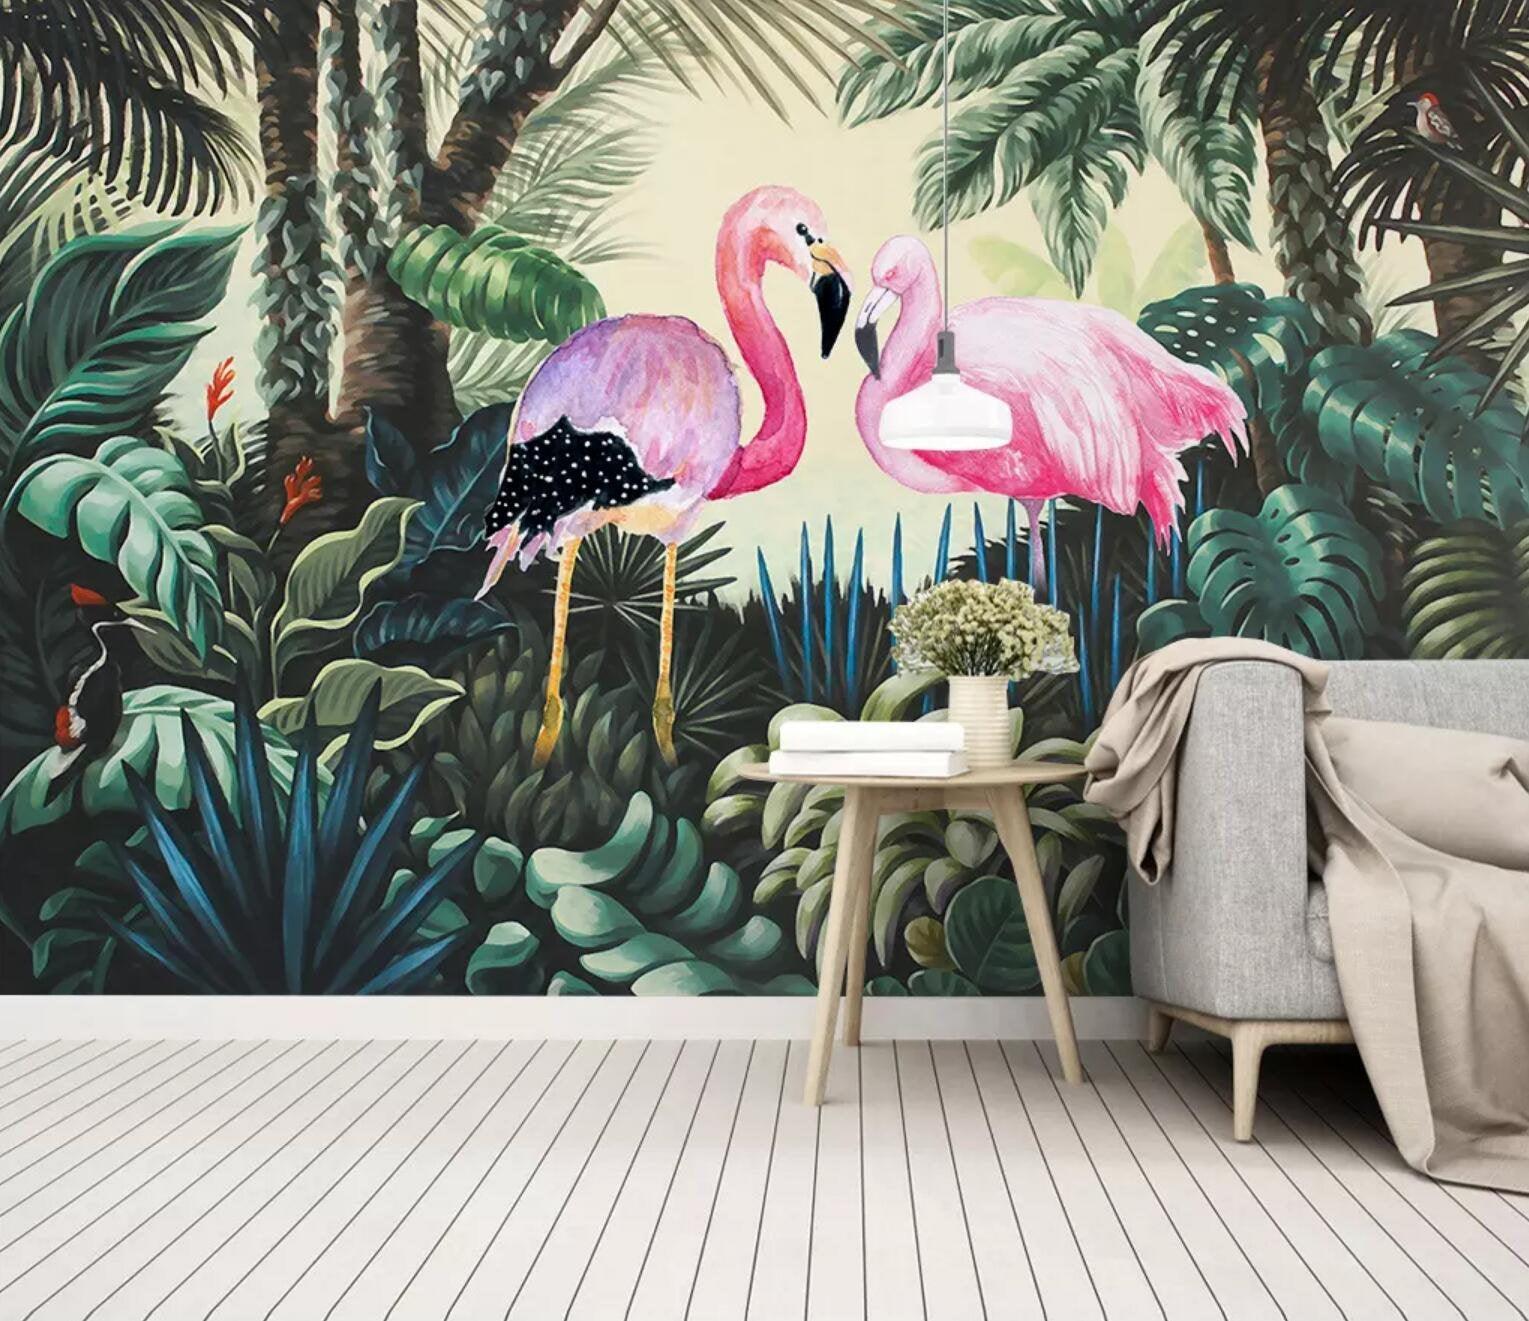 3D Tropical forest, Plant, Flamingo Wallpaper,Removable Self Adhesive Wallpaper, Wall Mural,Vintage art,Peel and Stick- Jess Art Decoration